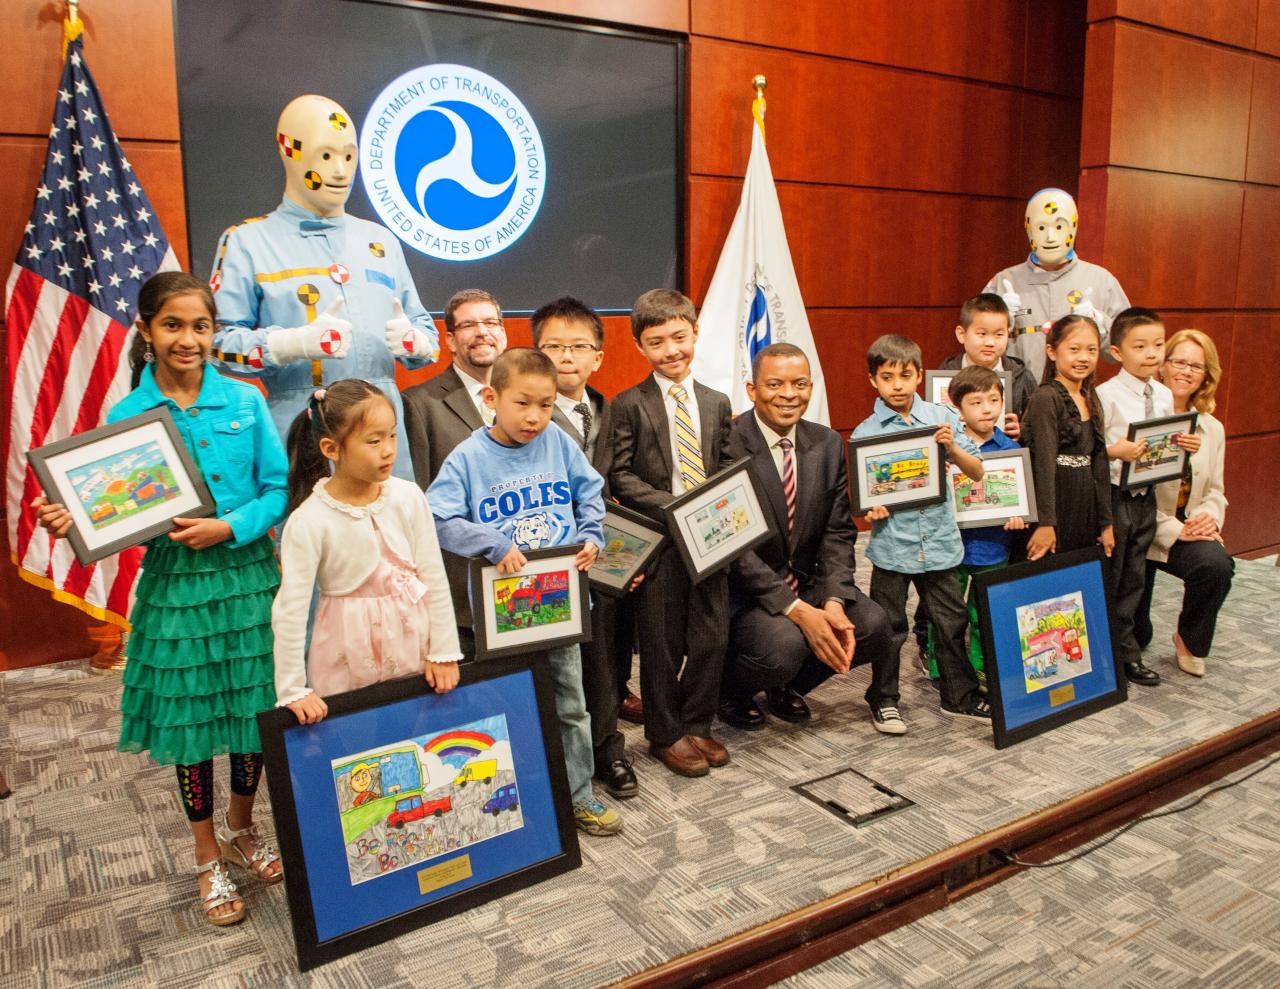 Contestants from the 2014 “Be Ready. Be Buckled.” student art contest at the U.S. Department of Transportation (DOT) headquarters on May 5, 2014.